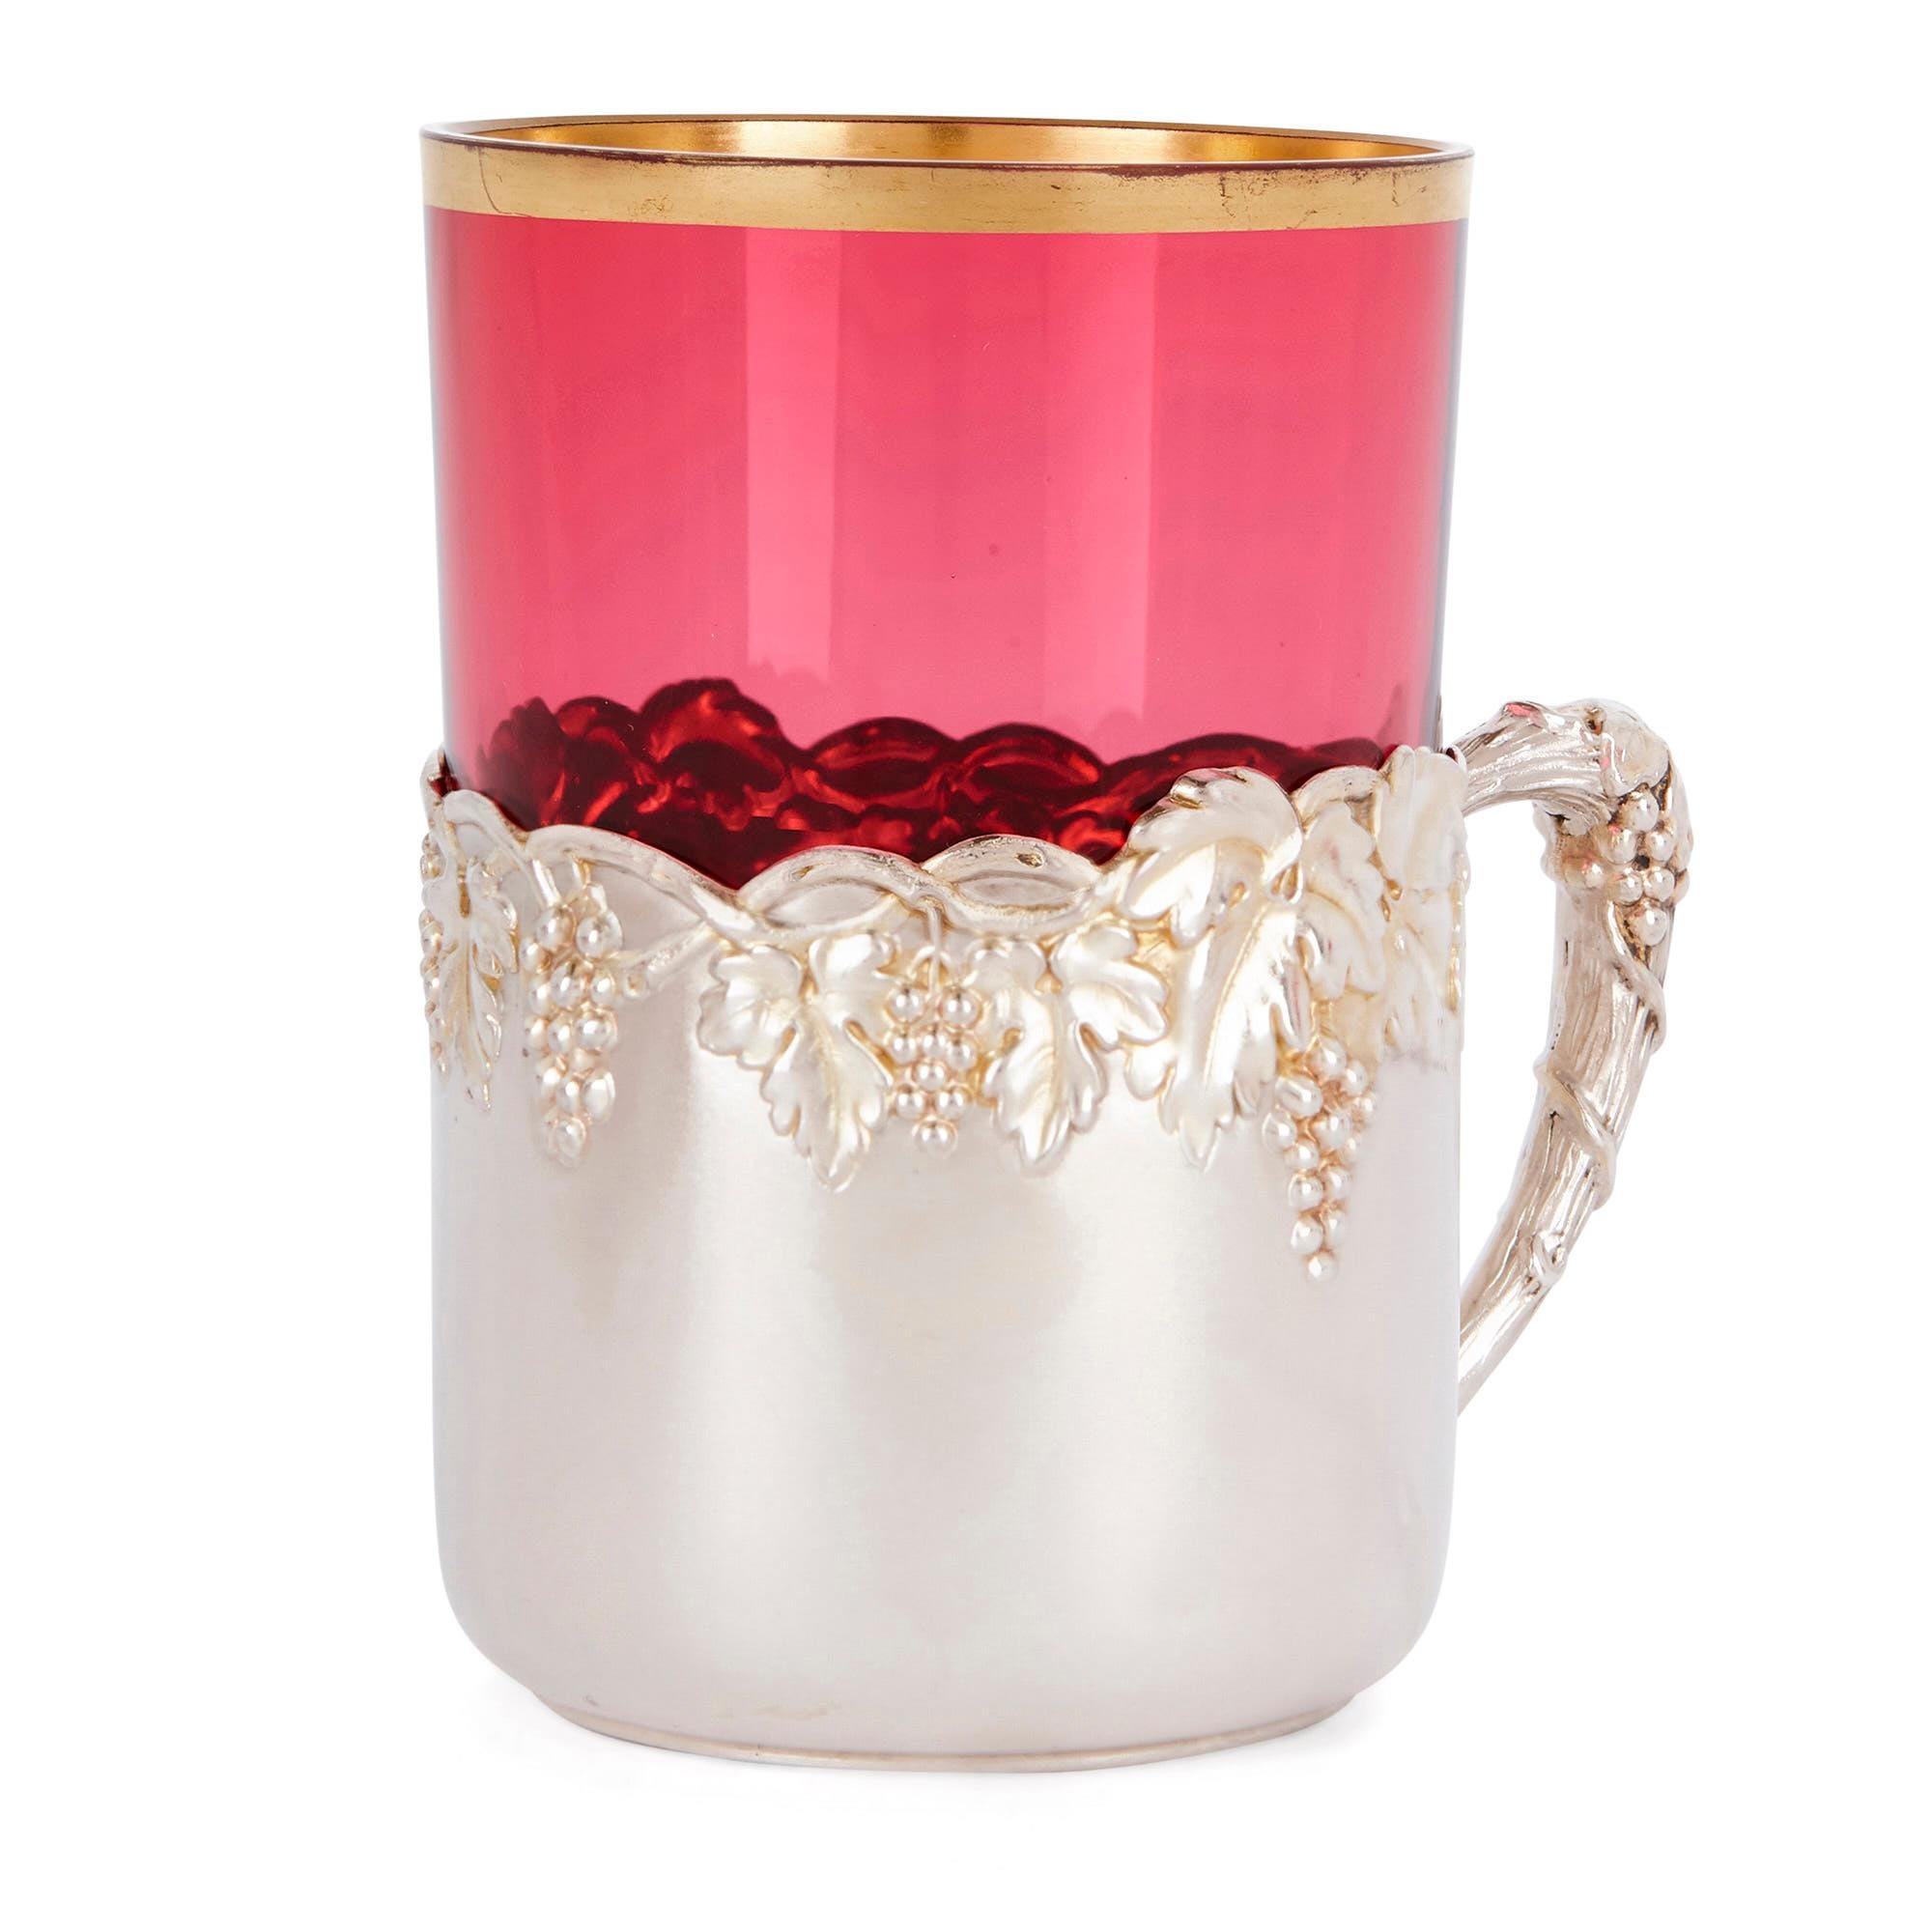 This beautiful drinking set was created in Germany in the early 20th century, circa 1900. The six cups will make an elegant addition to a collection of drink- or tableware. 

Each item is composed of a silver cup with a single handle, which is